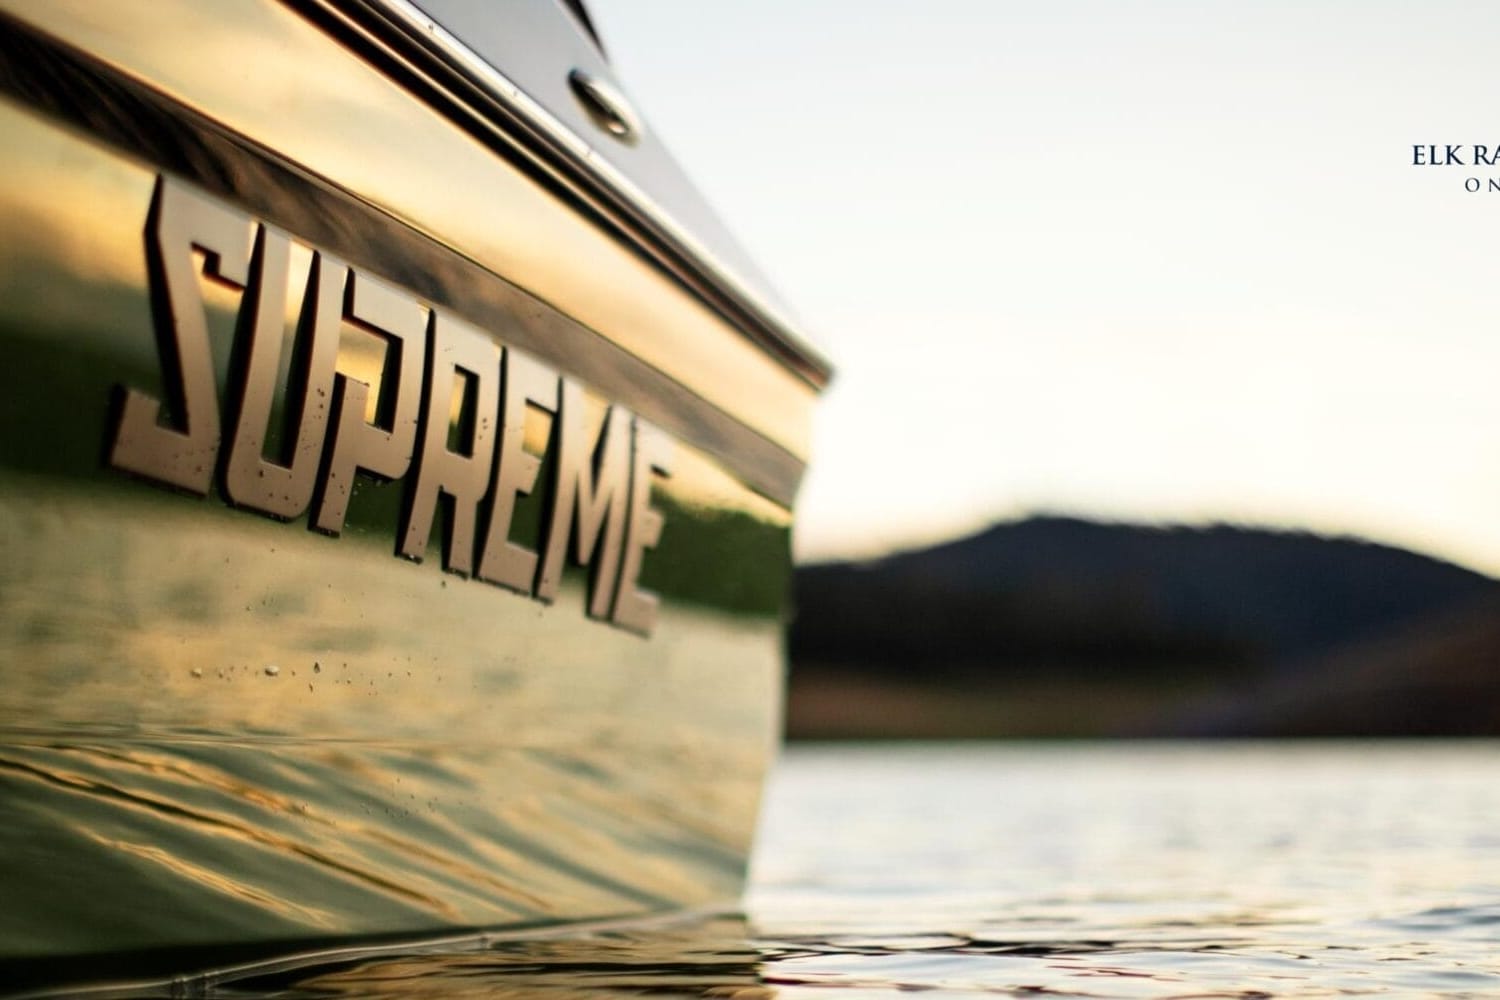 Close-up of a green Centurion boat on a lake with 